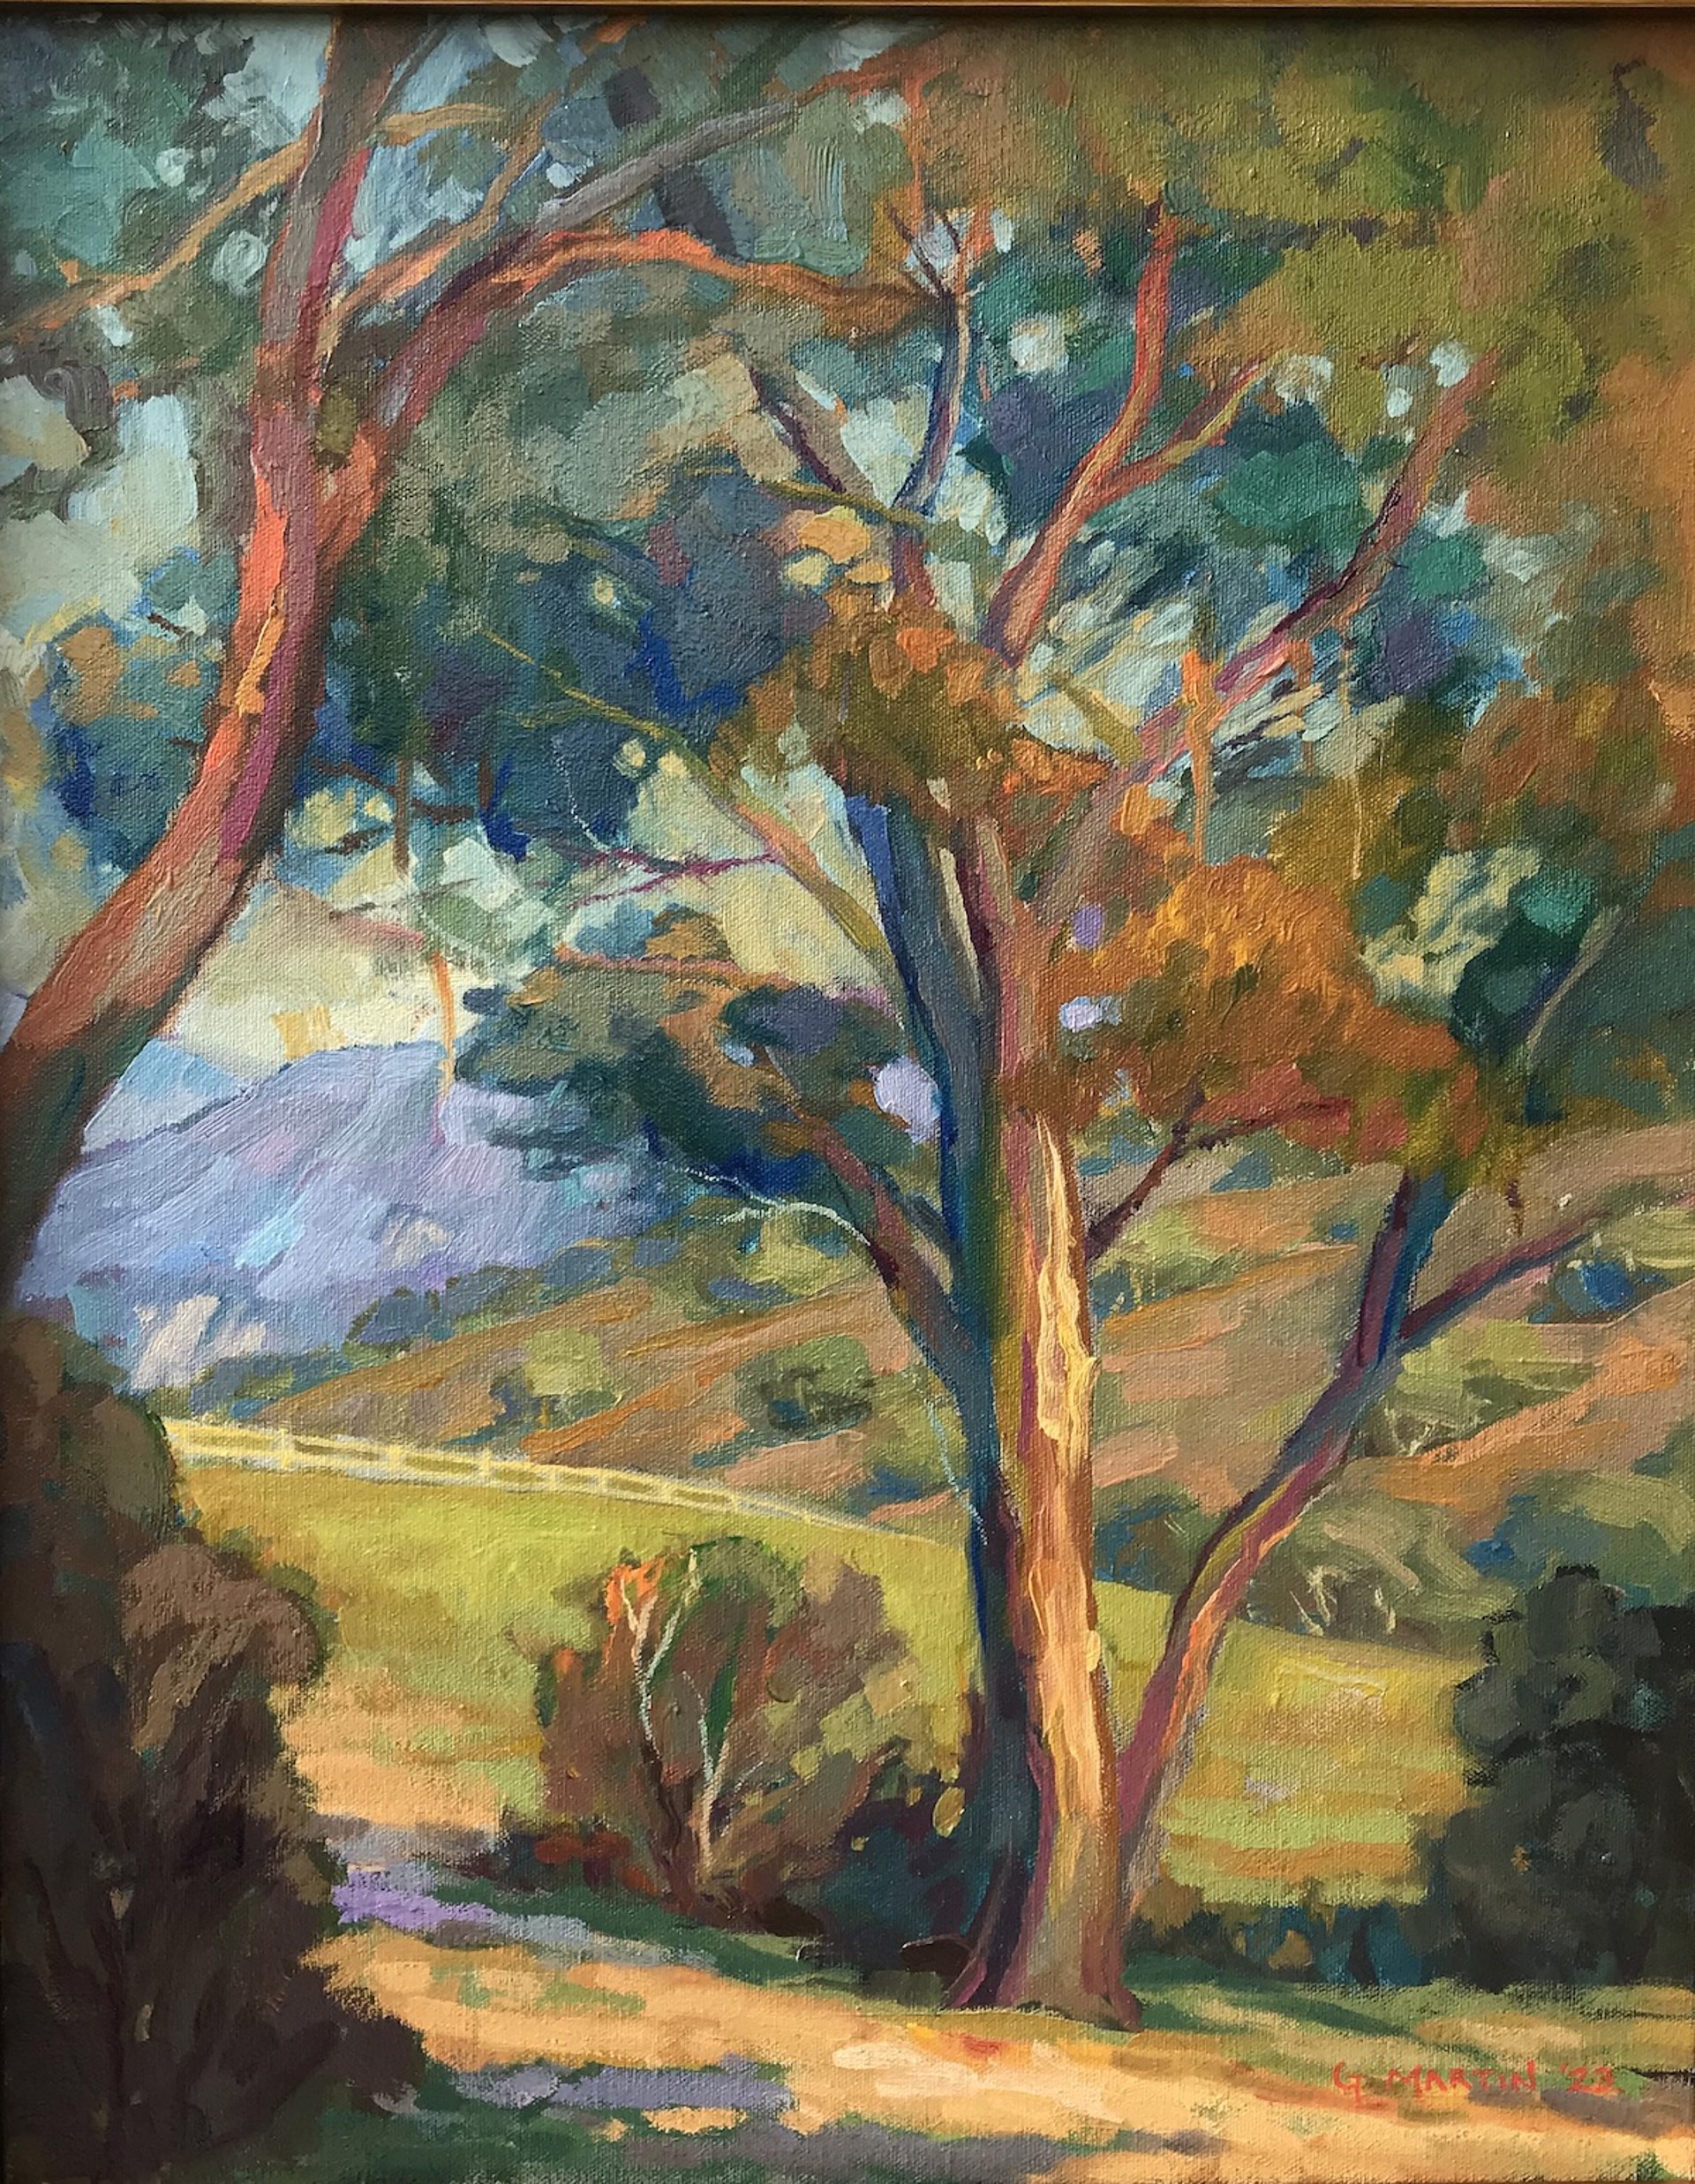 Eucalyptus In The Hills by Gerard Martin